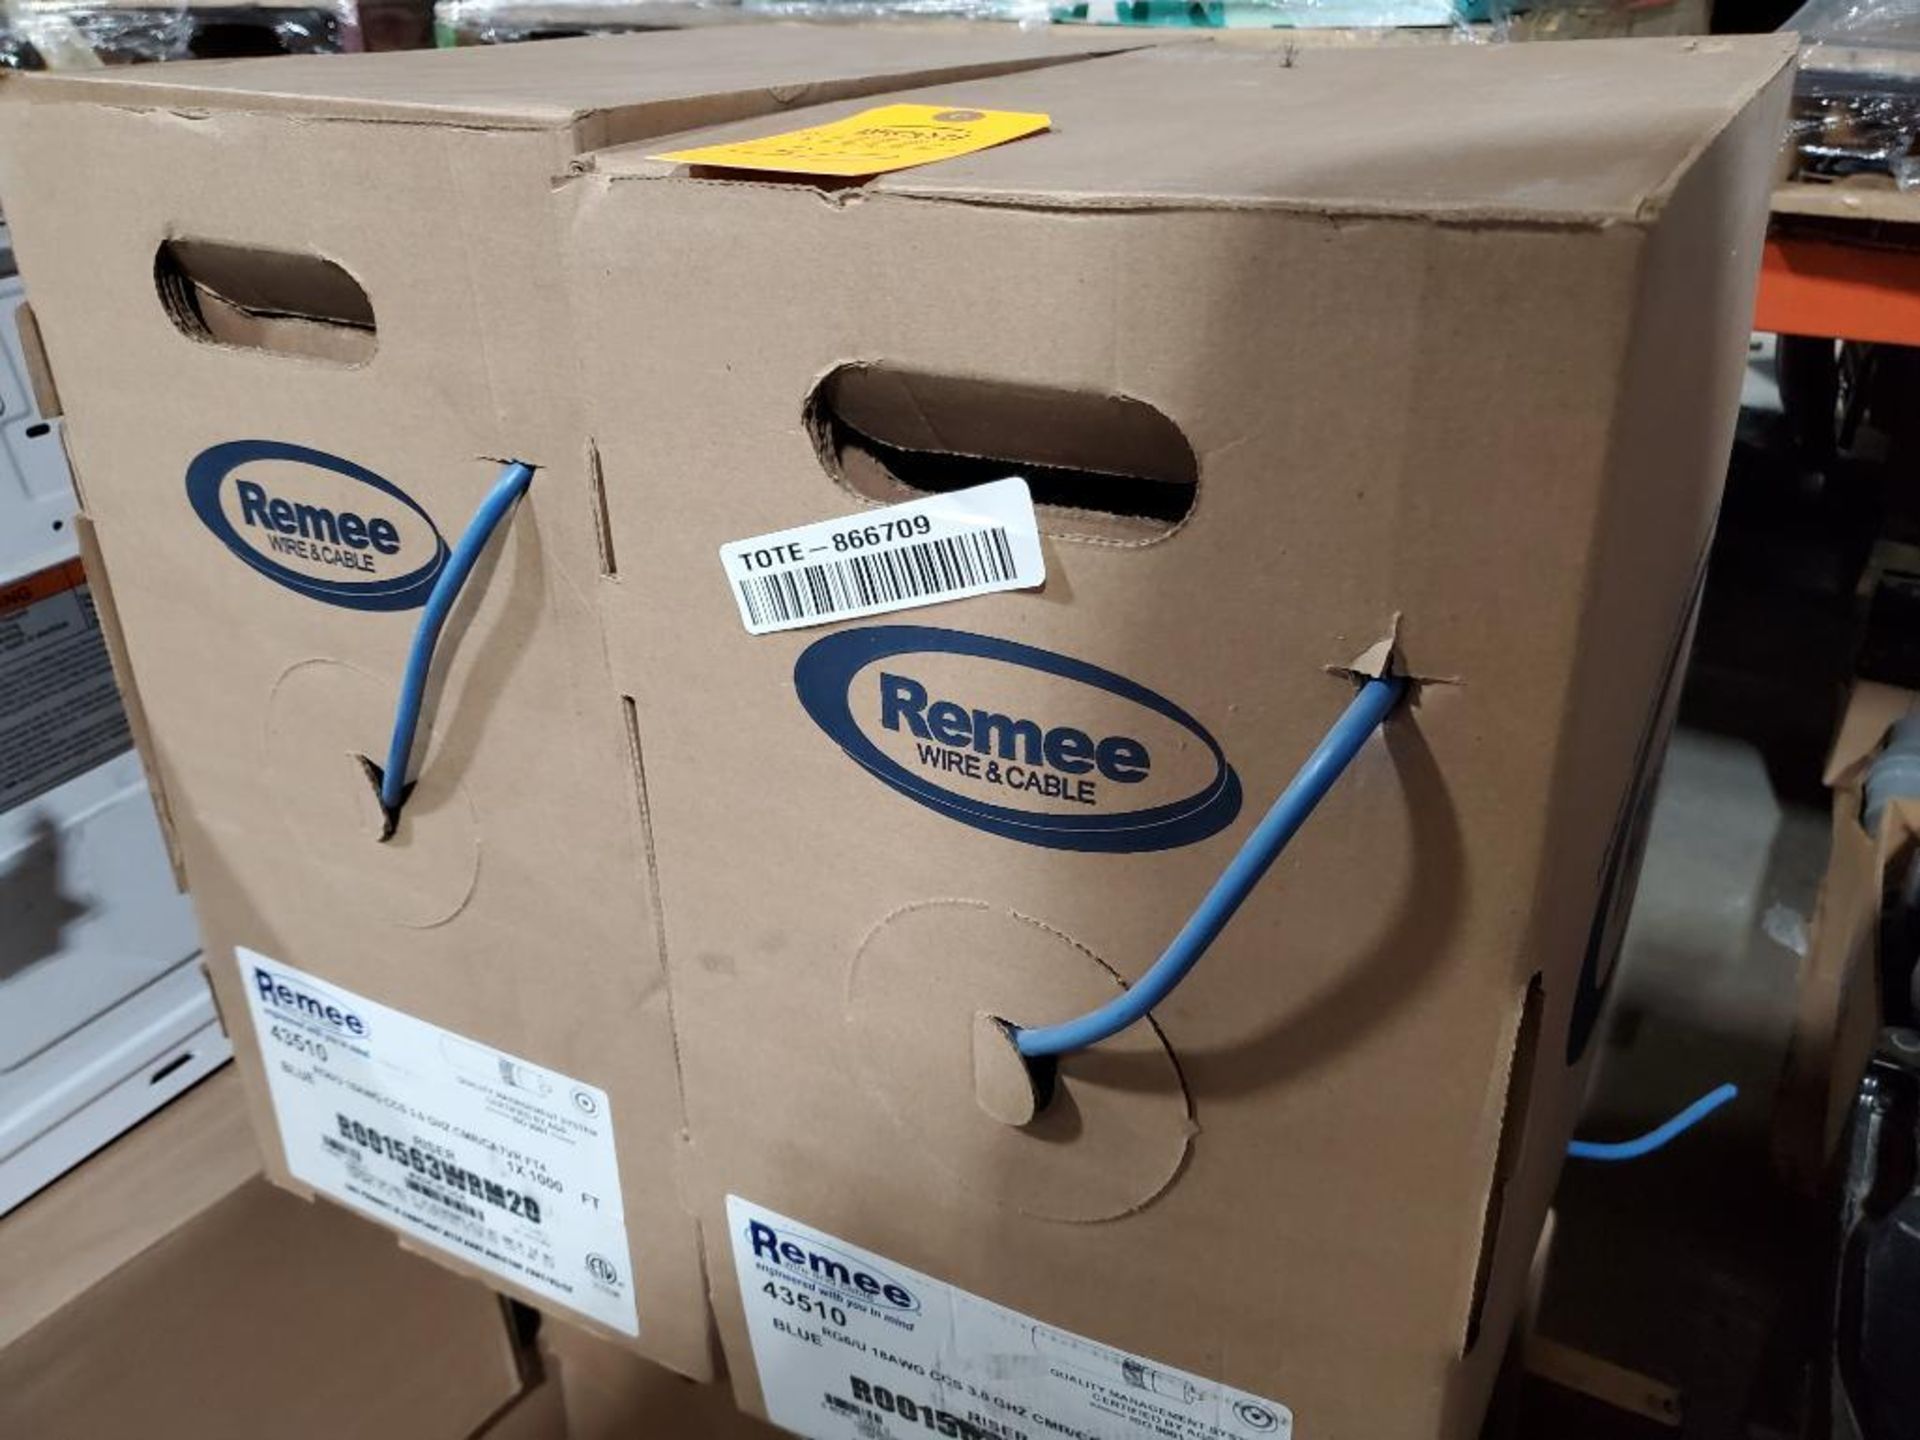 Qty 2 - Boxes of Remee wire and cable coaxial. - Bild 3 aus 3